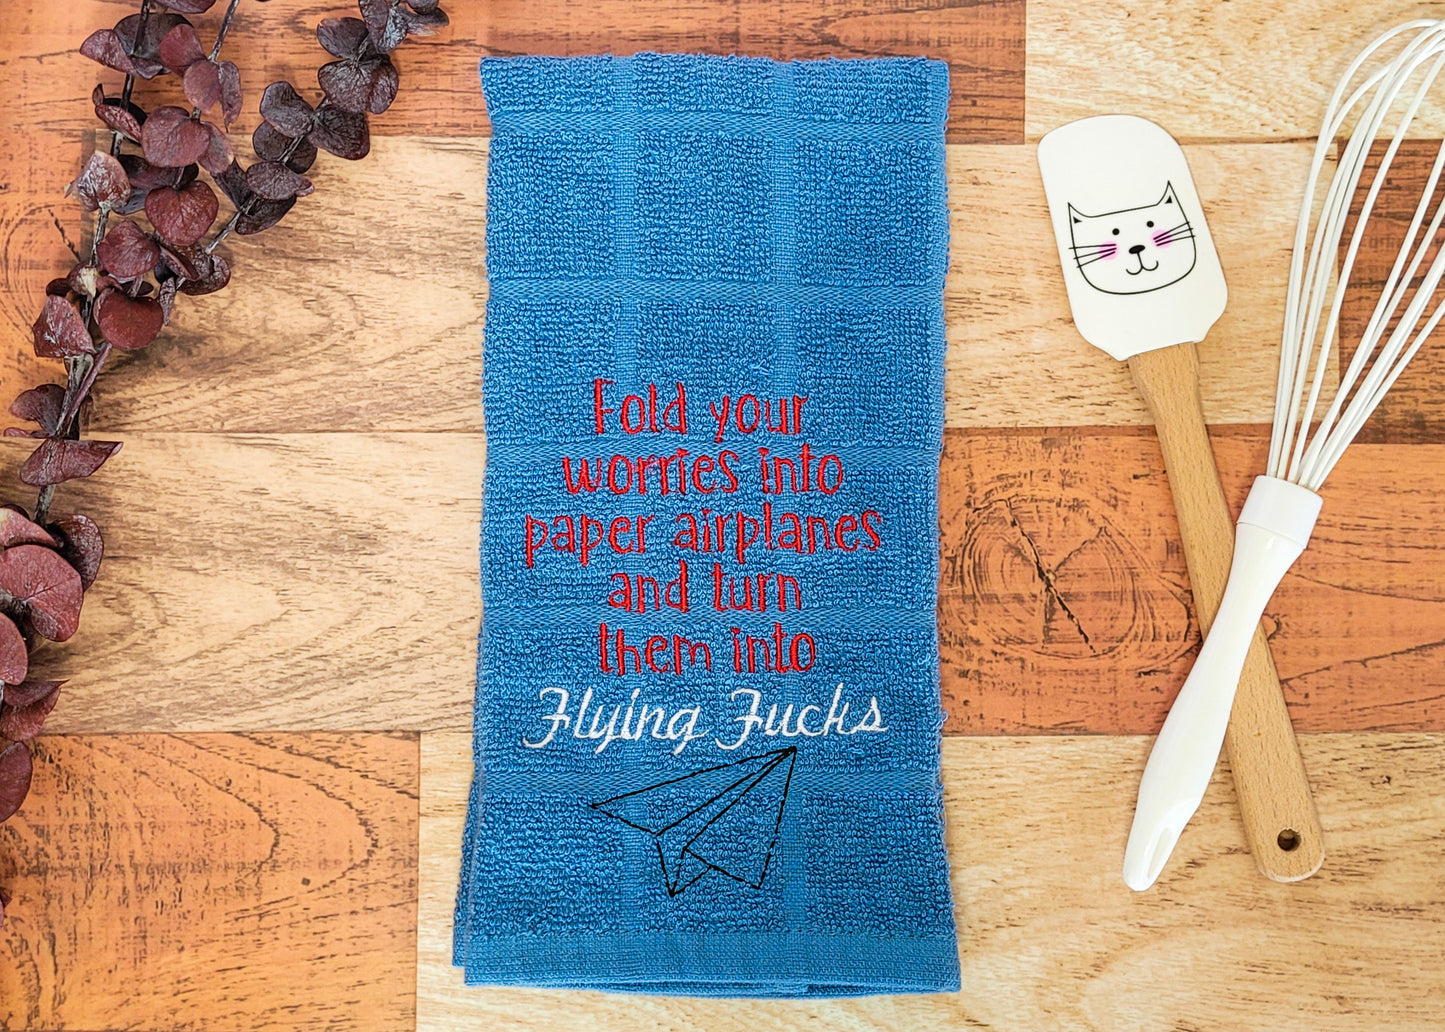 Fold Your Worries Into Paper Airplanes and Turn Them Into Flying Fucks Embroidered Hand & Tea Towel